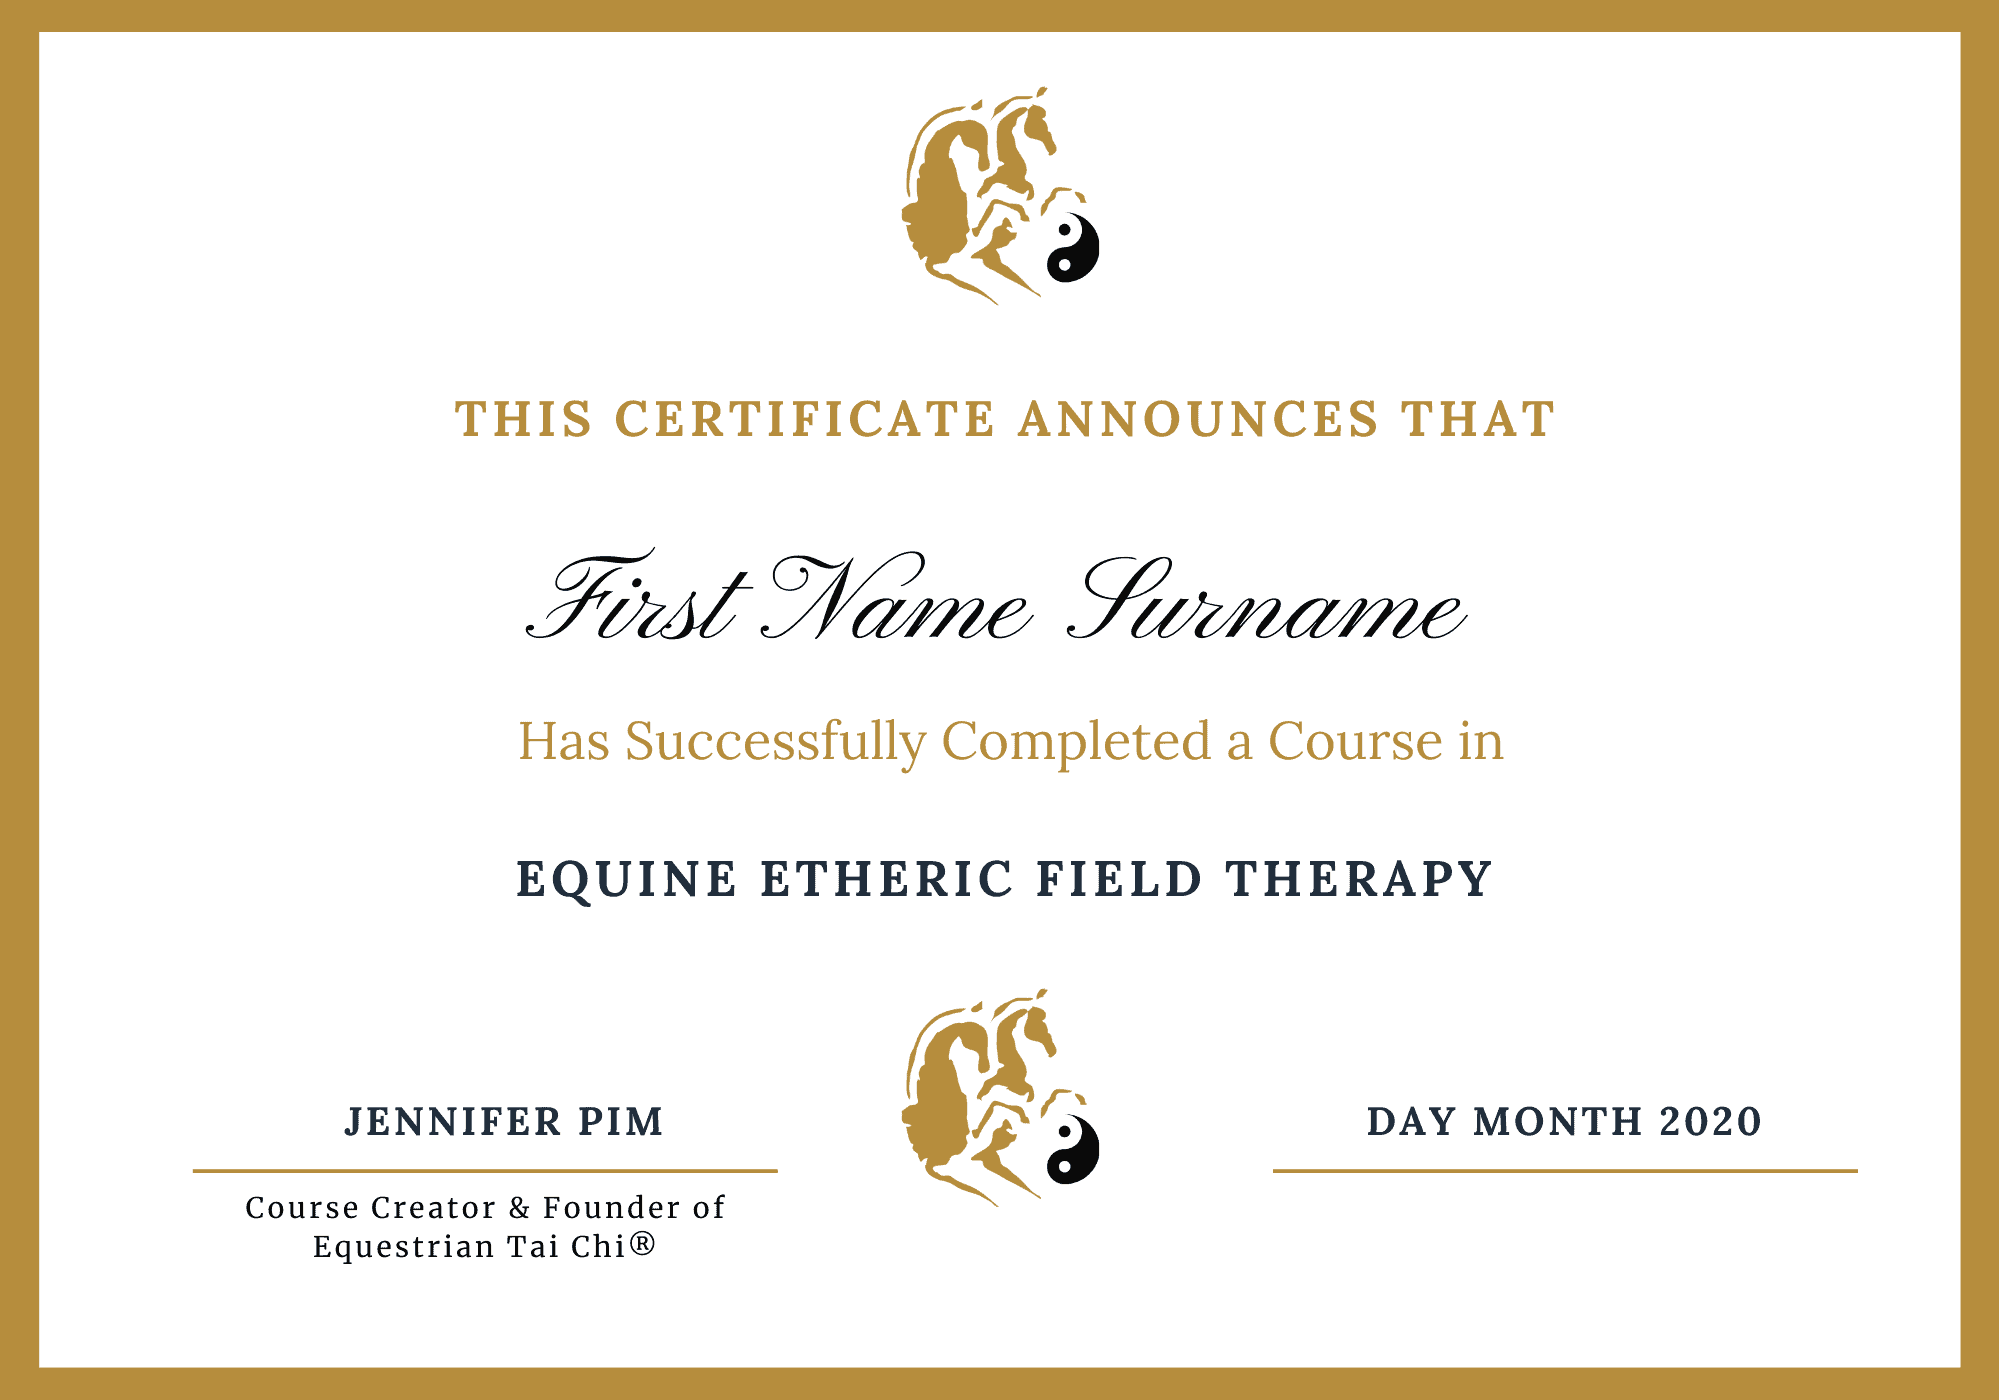 Equine Etheric Field Therapy Certificate